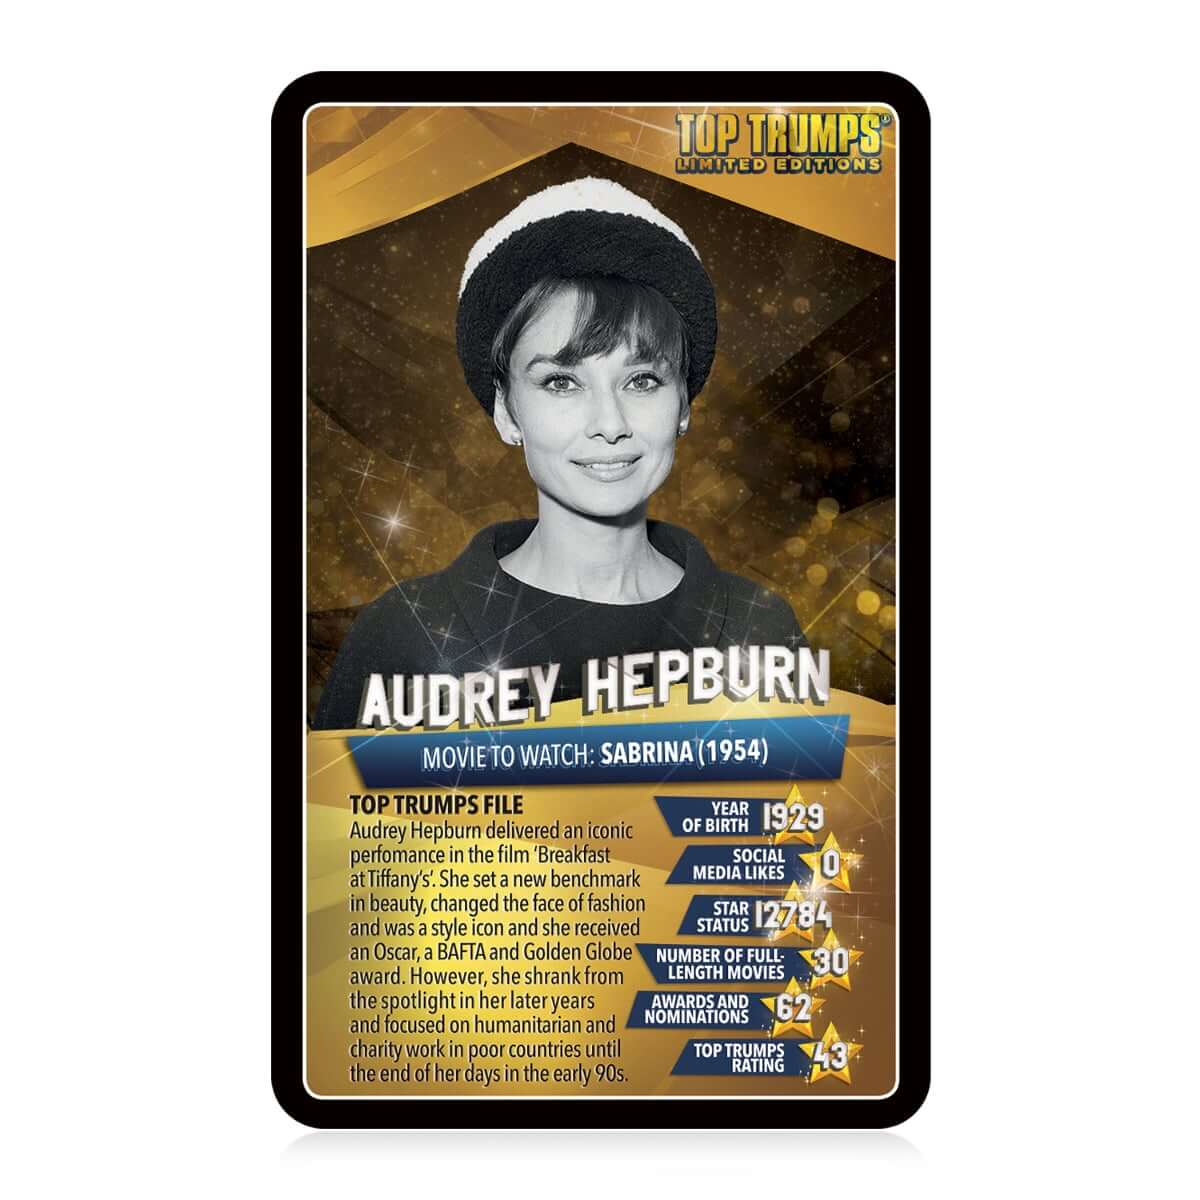 Top 30 Movie Stars Top Trumps Card Game